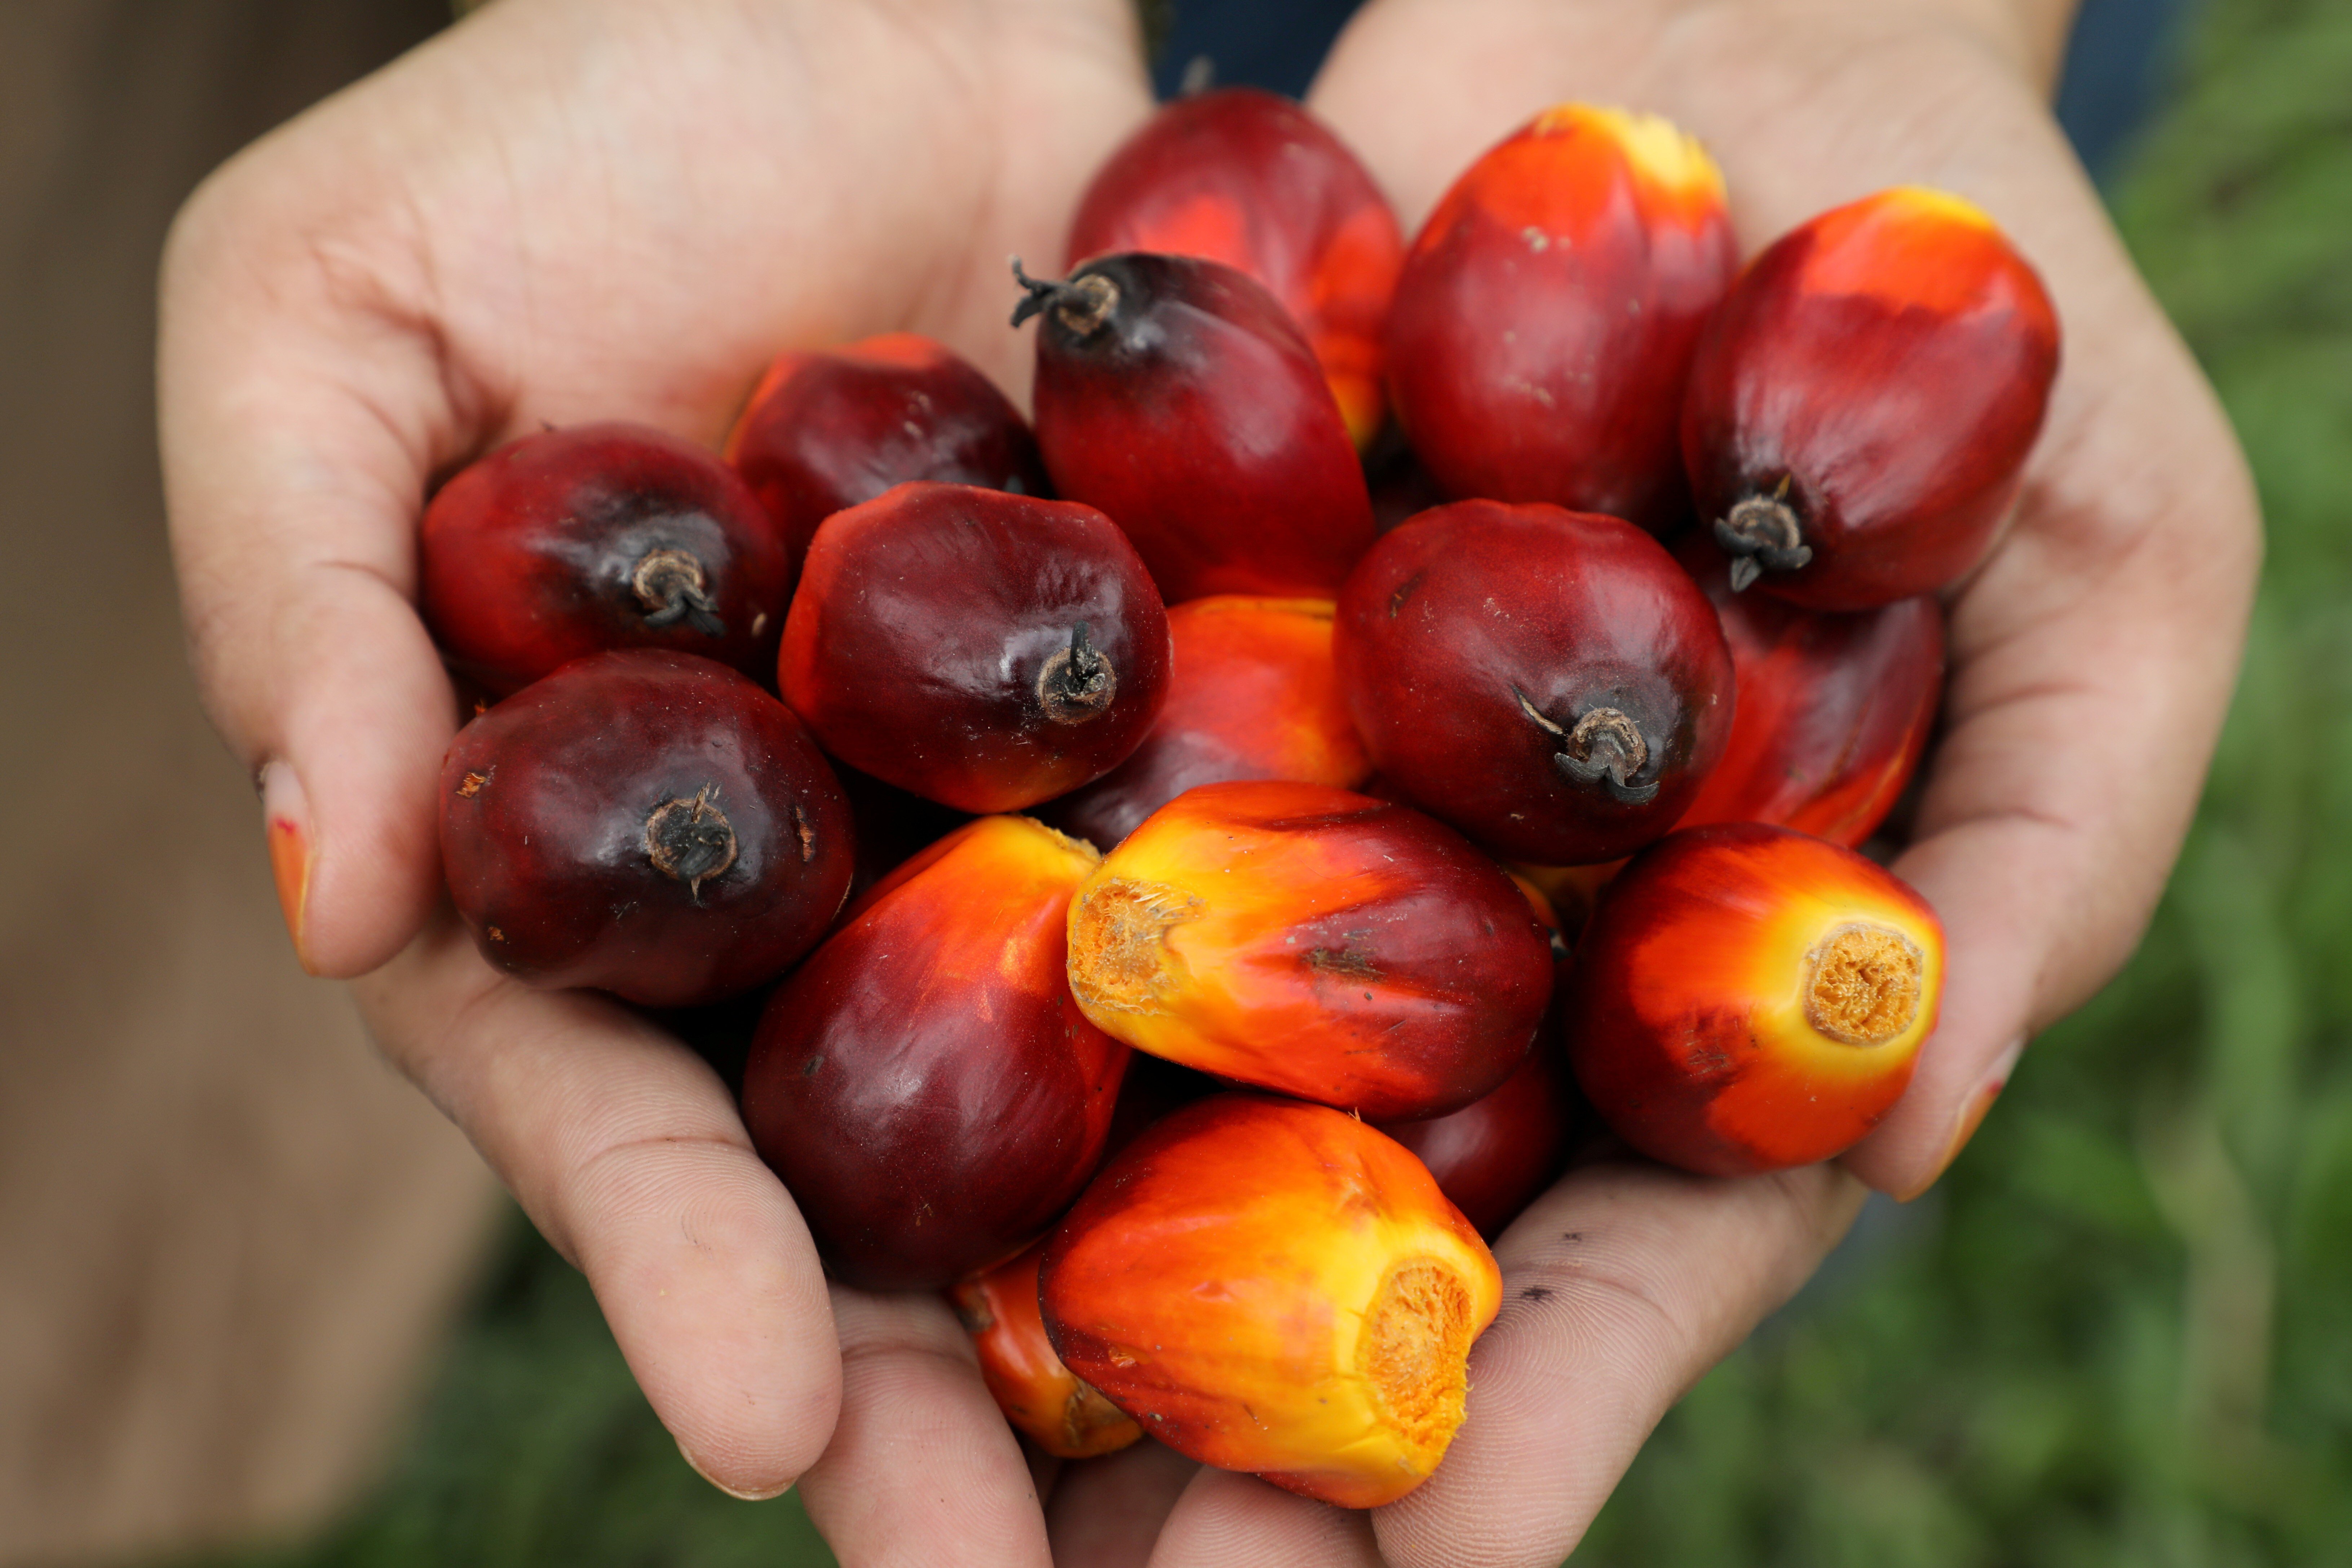 Palm oil fruits from a plantation in Pulau Carey, Malaysia. Photo: Reuters